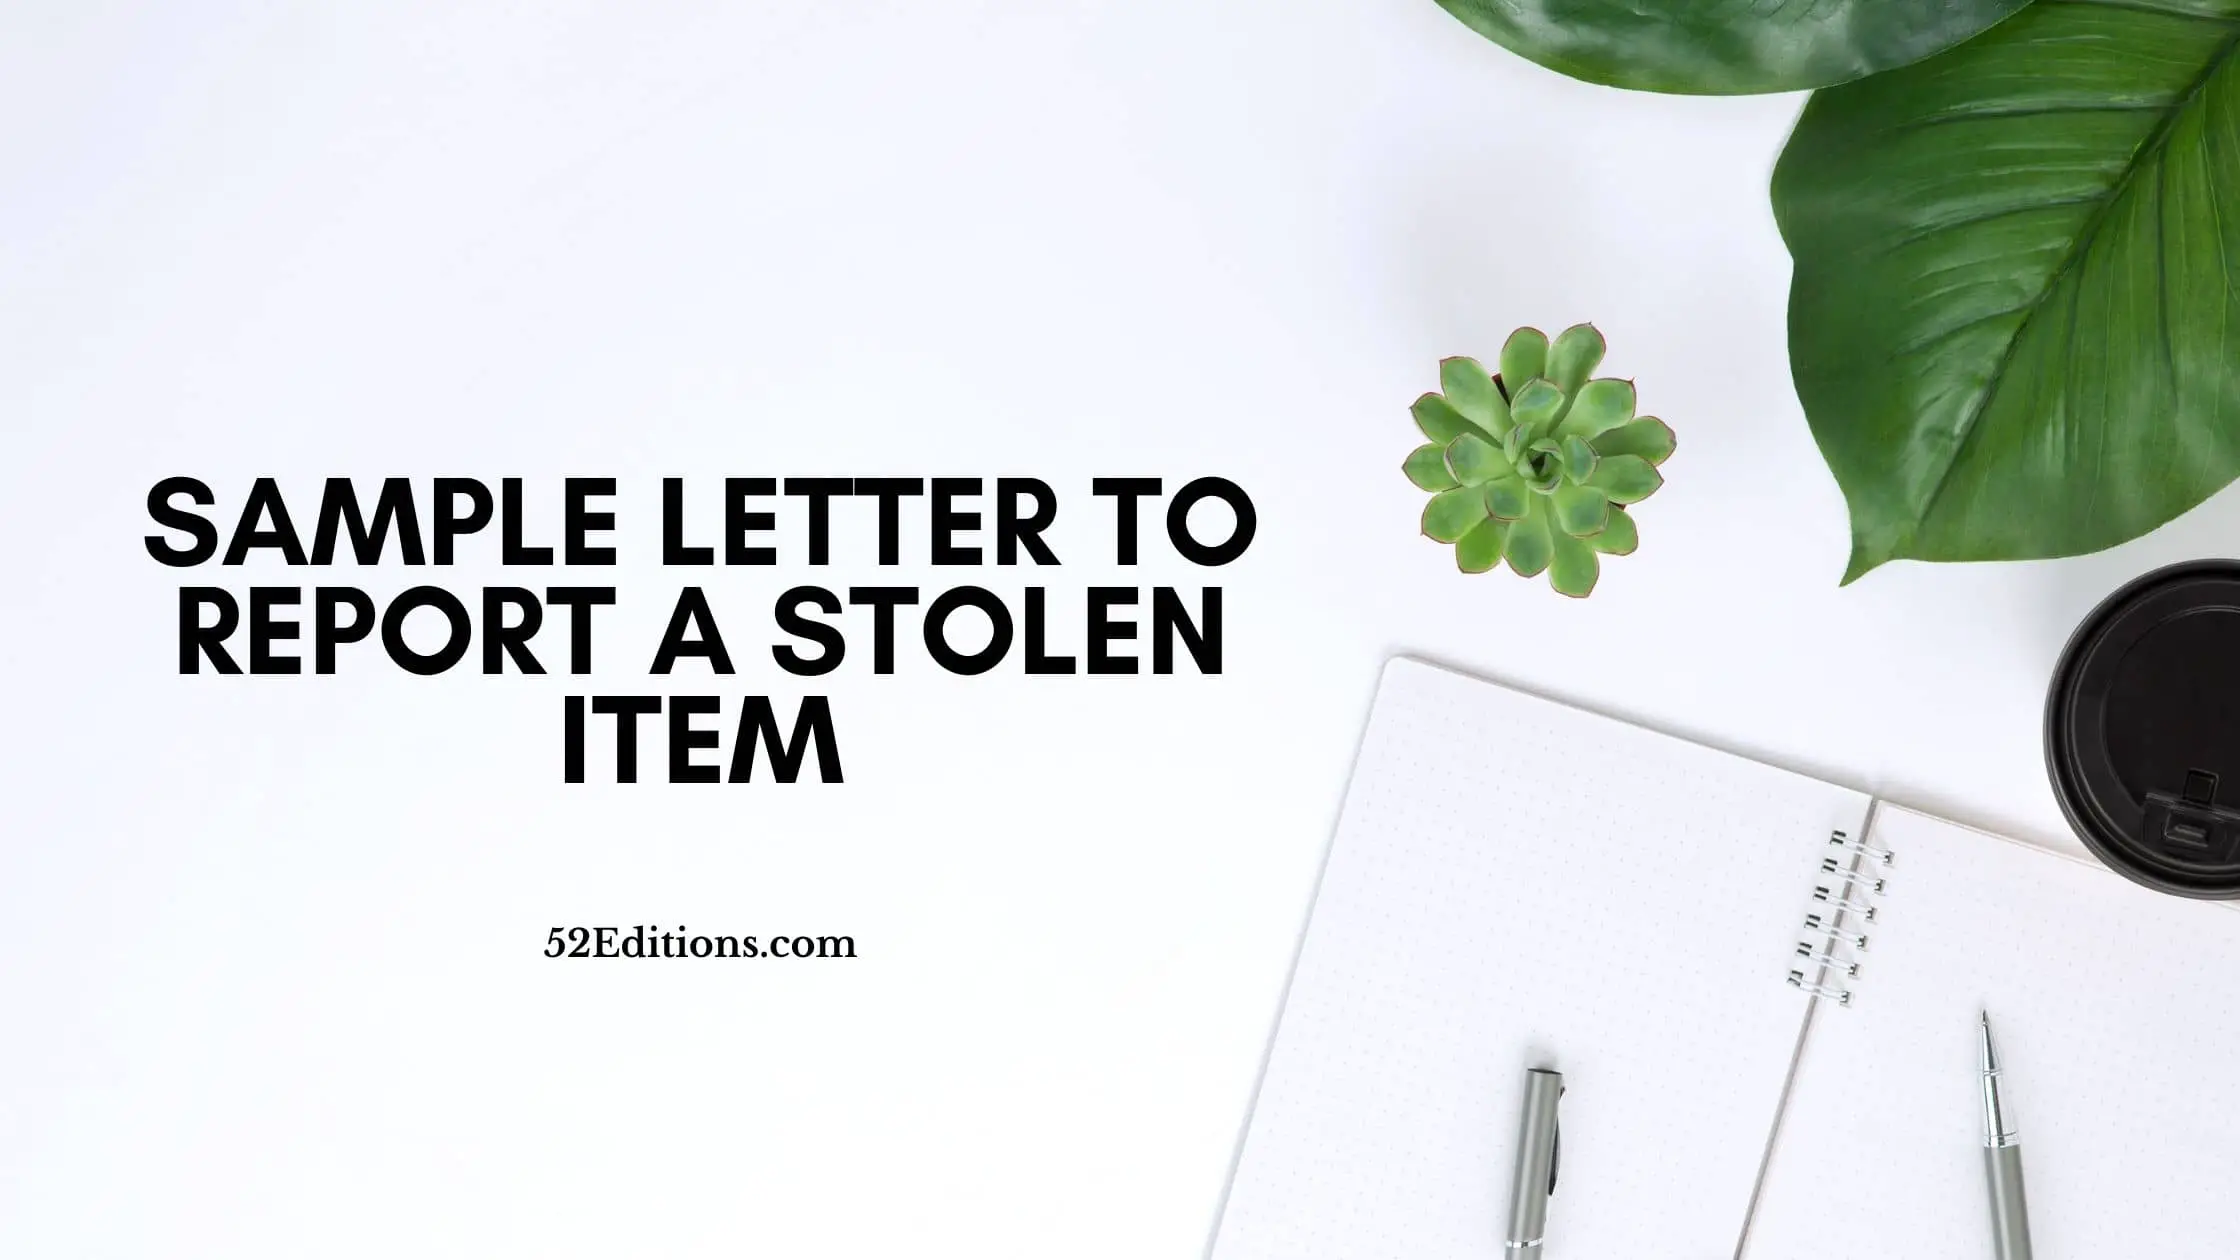 Sample Letter To Report a Stolen Item // FREE Letter Templates